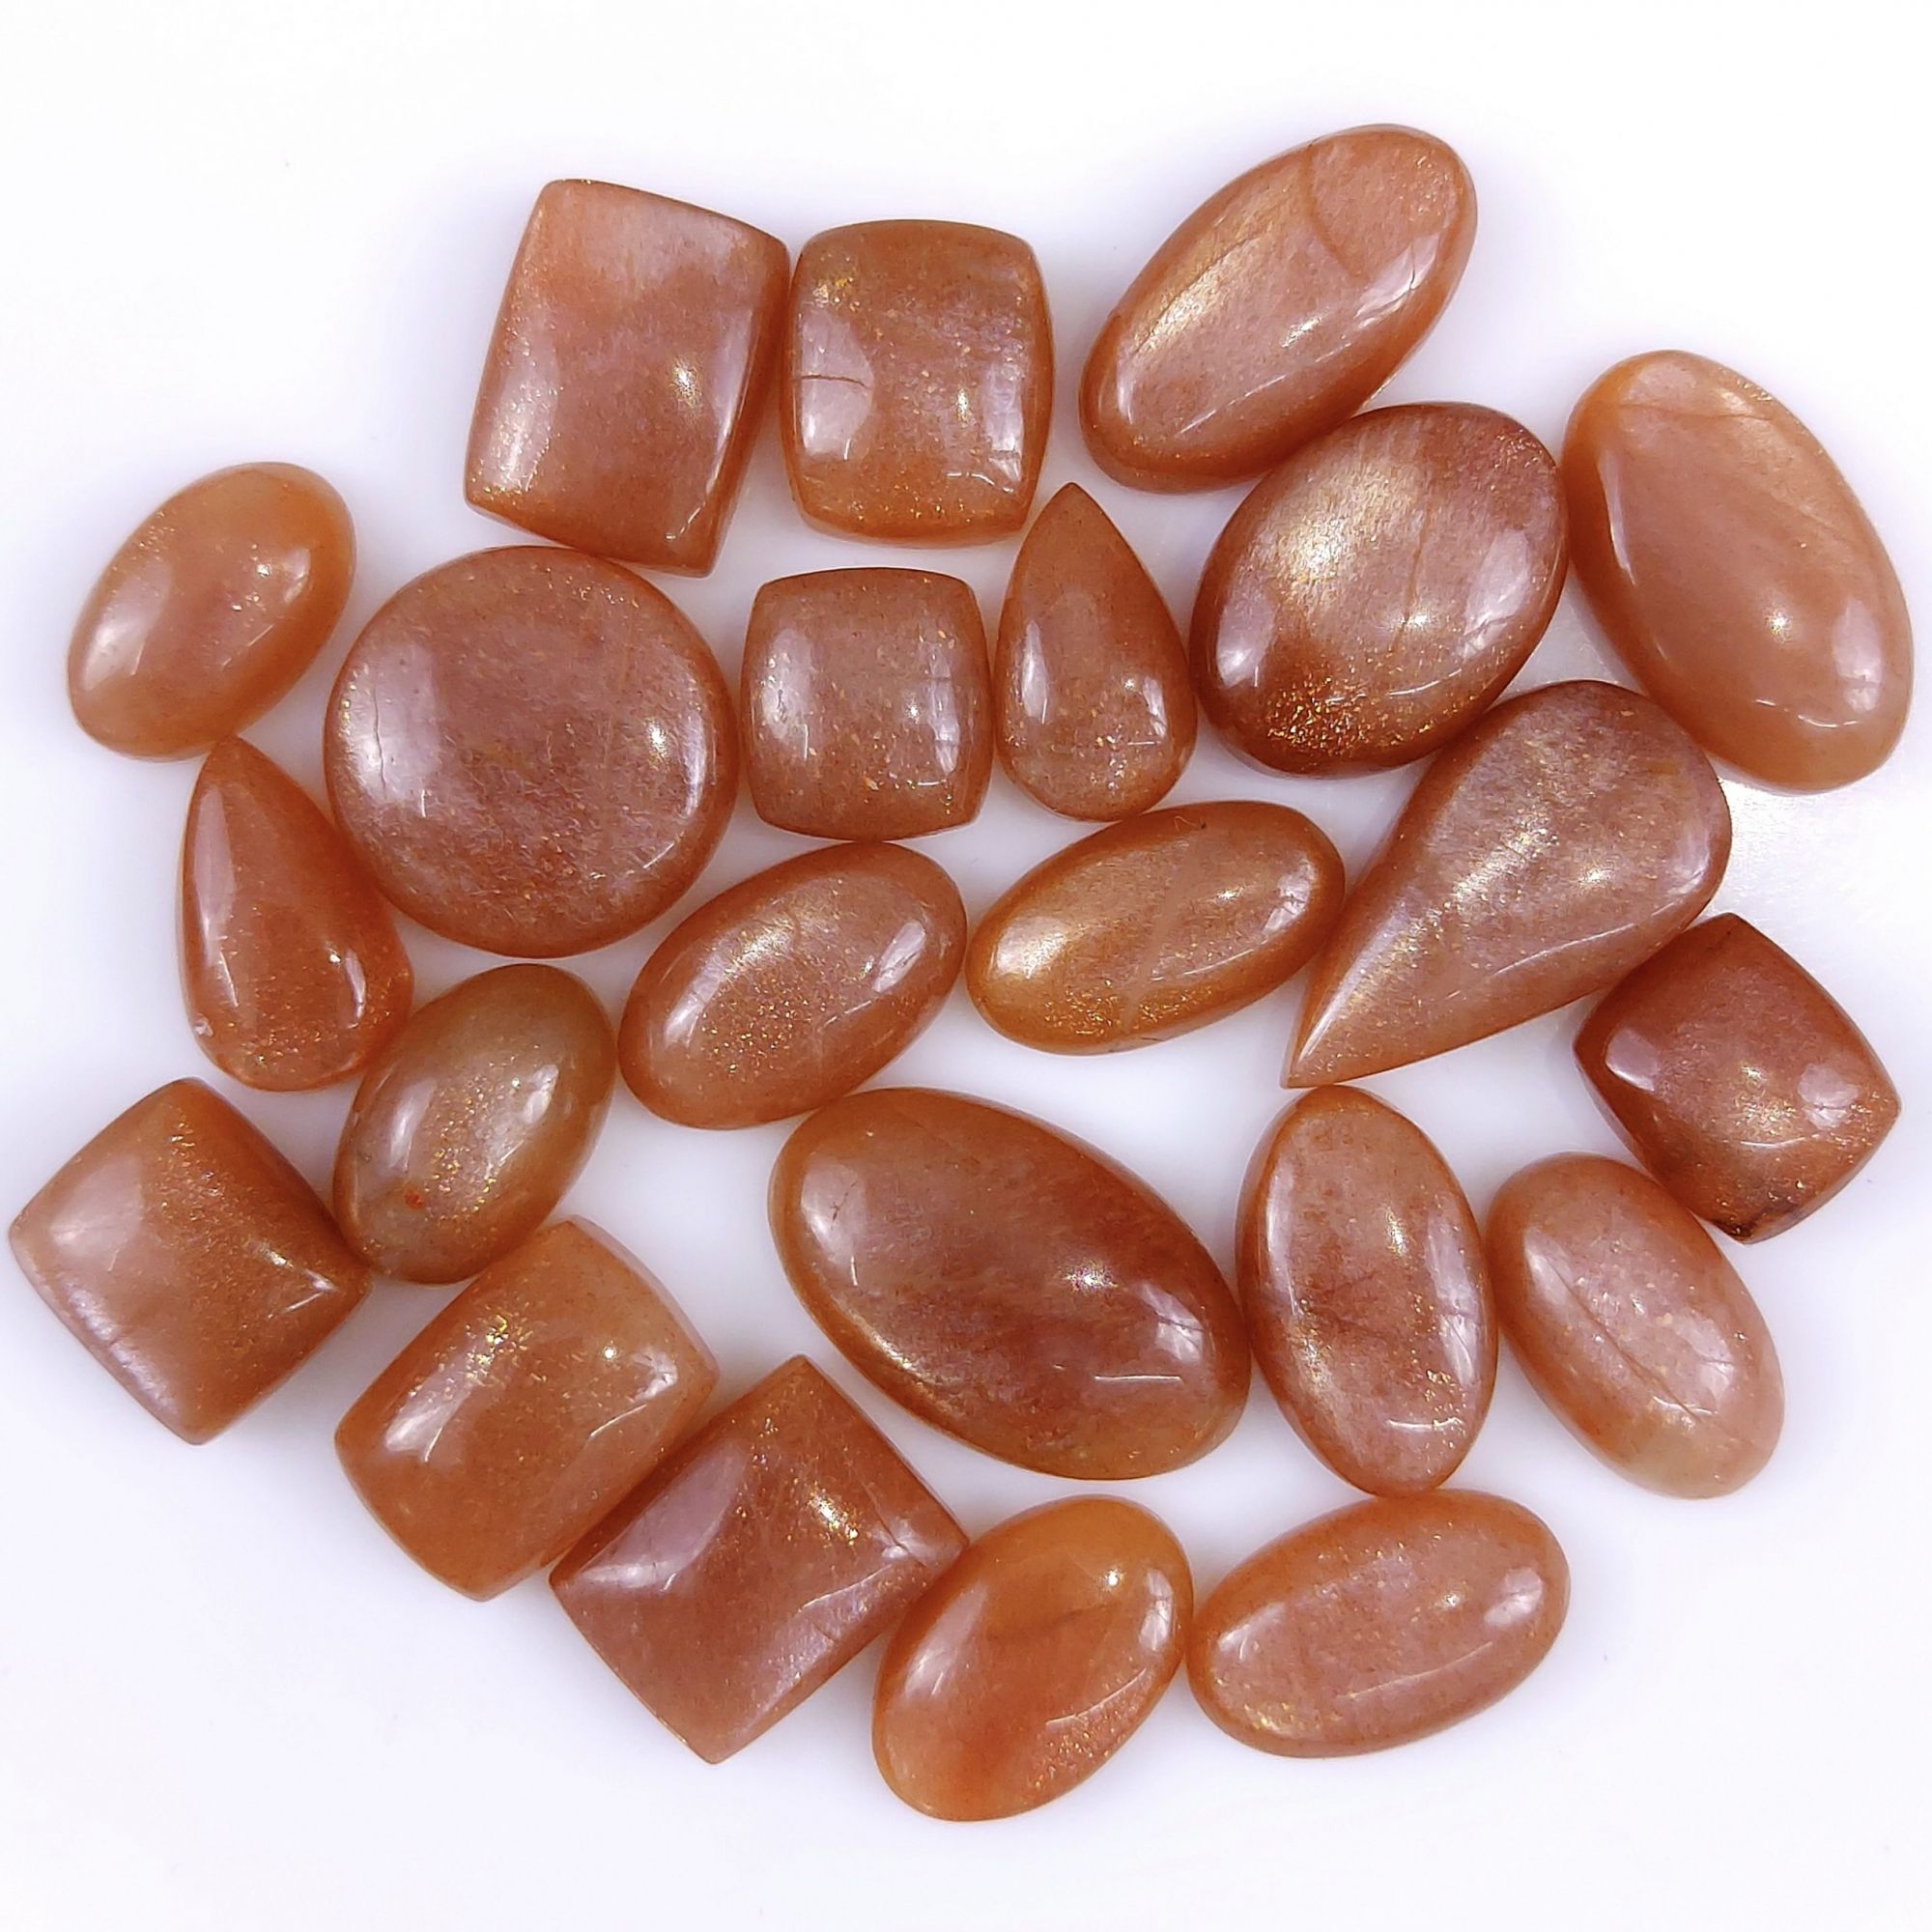 23Pcs 317Cts Natural Peach Moonstone Cabochon lot Gemstone Crystal Mix Shape Loose Gemstone beads for jewelry Making 28x17 15x15mm